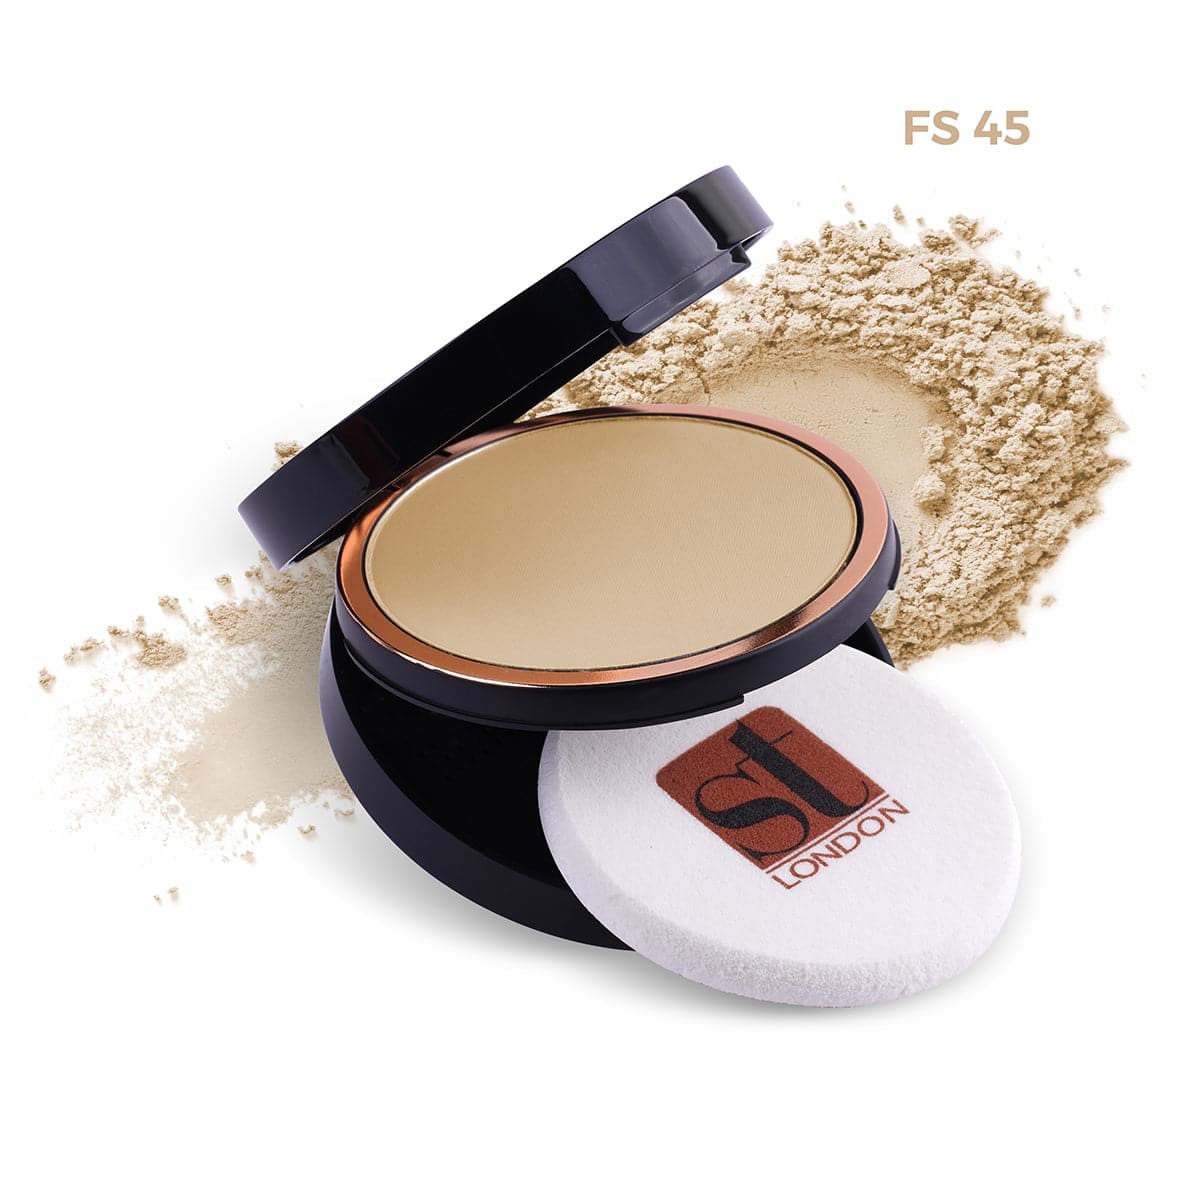 ST London Dual Wet & Dry Compact Powder - Fs 45 - Premium Health & Beauty from St London - Just Rs 2330.00! Shop now at Cozmetica